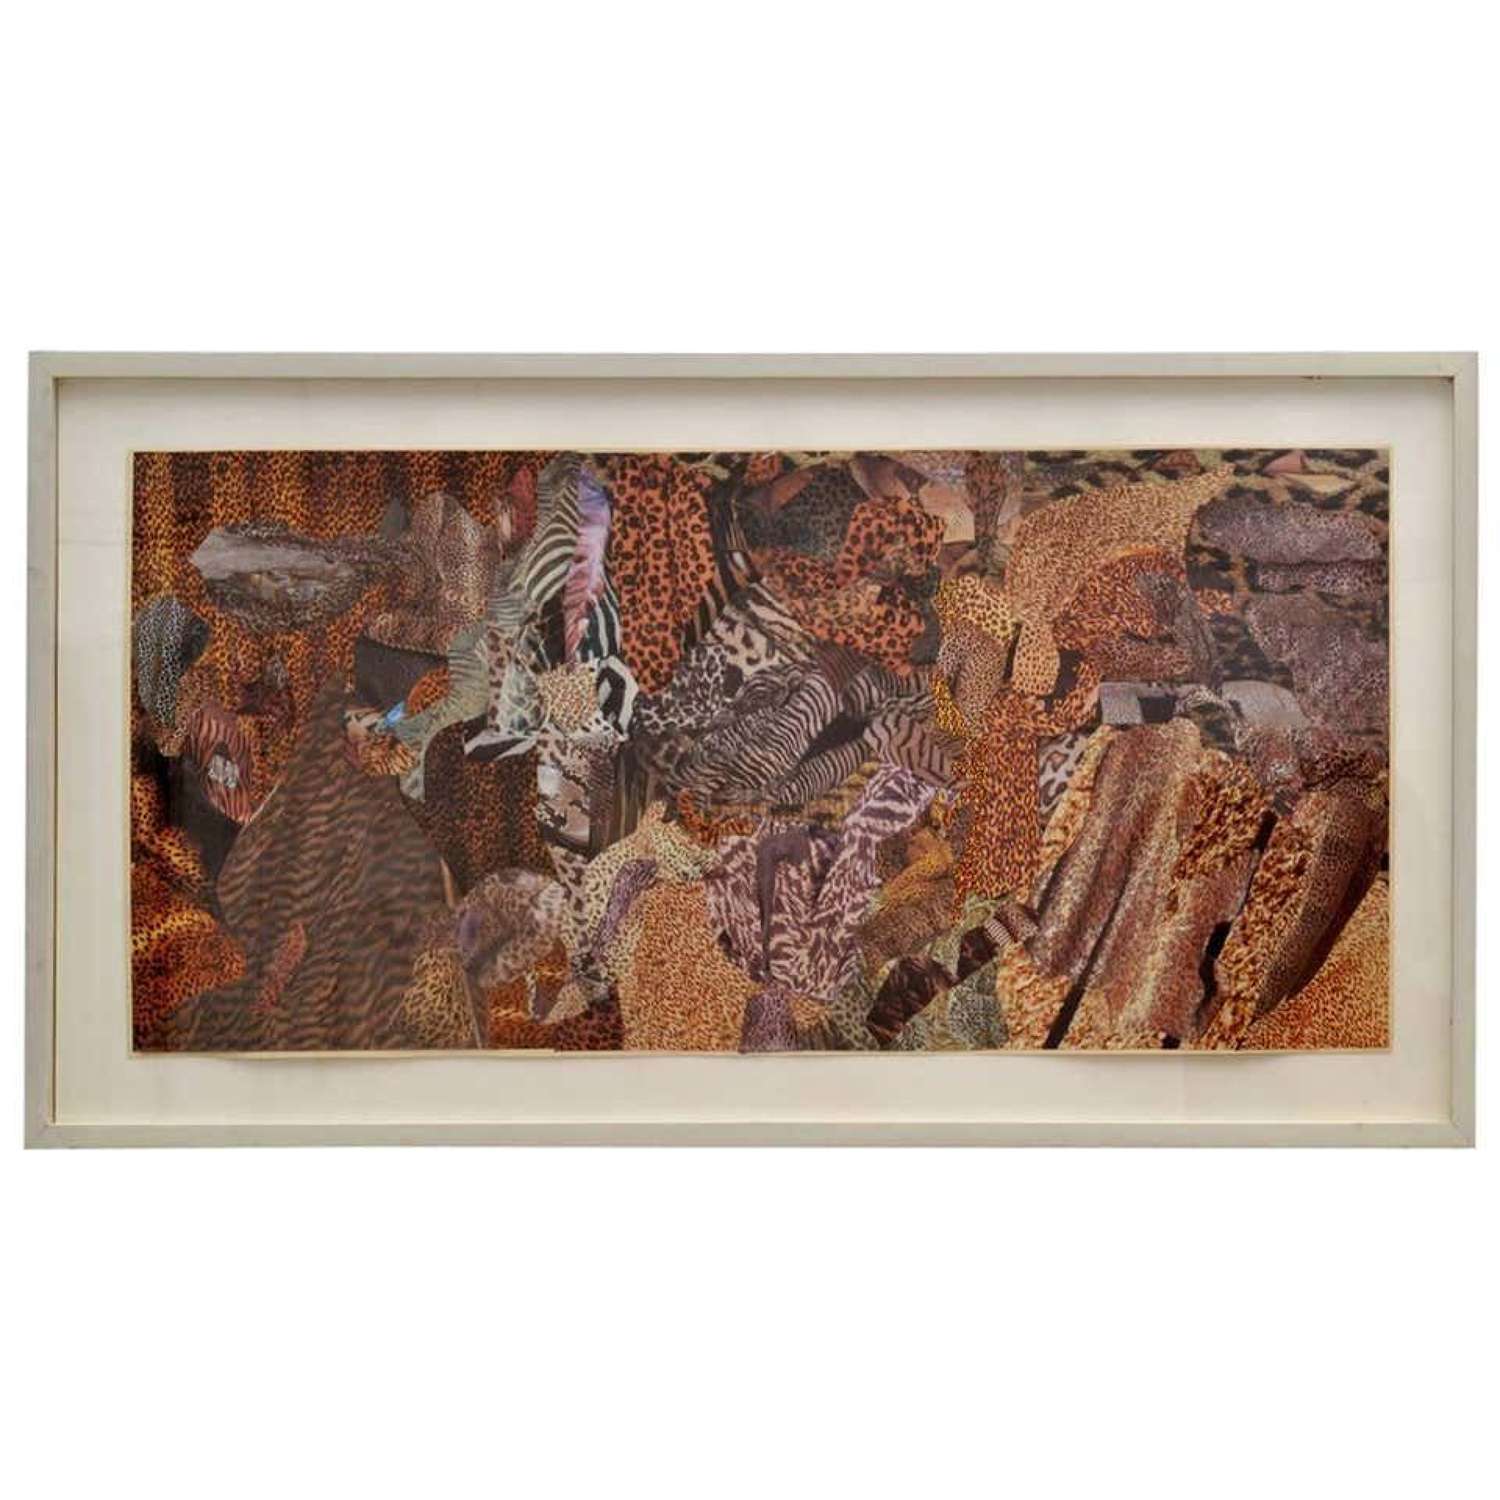 Abstract Collage Art in Brown by B Allan, UK, 1993